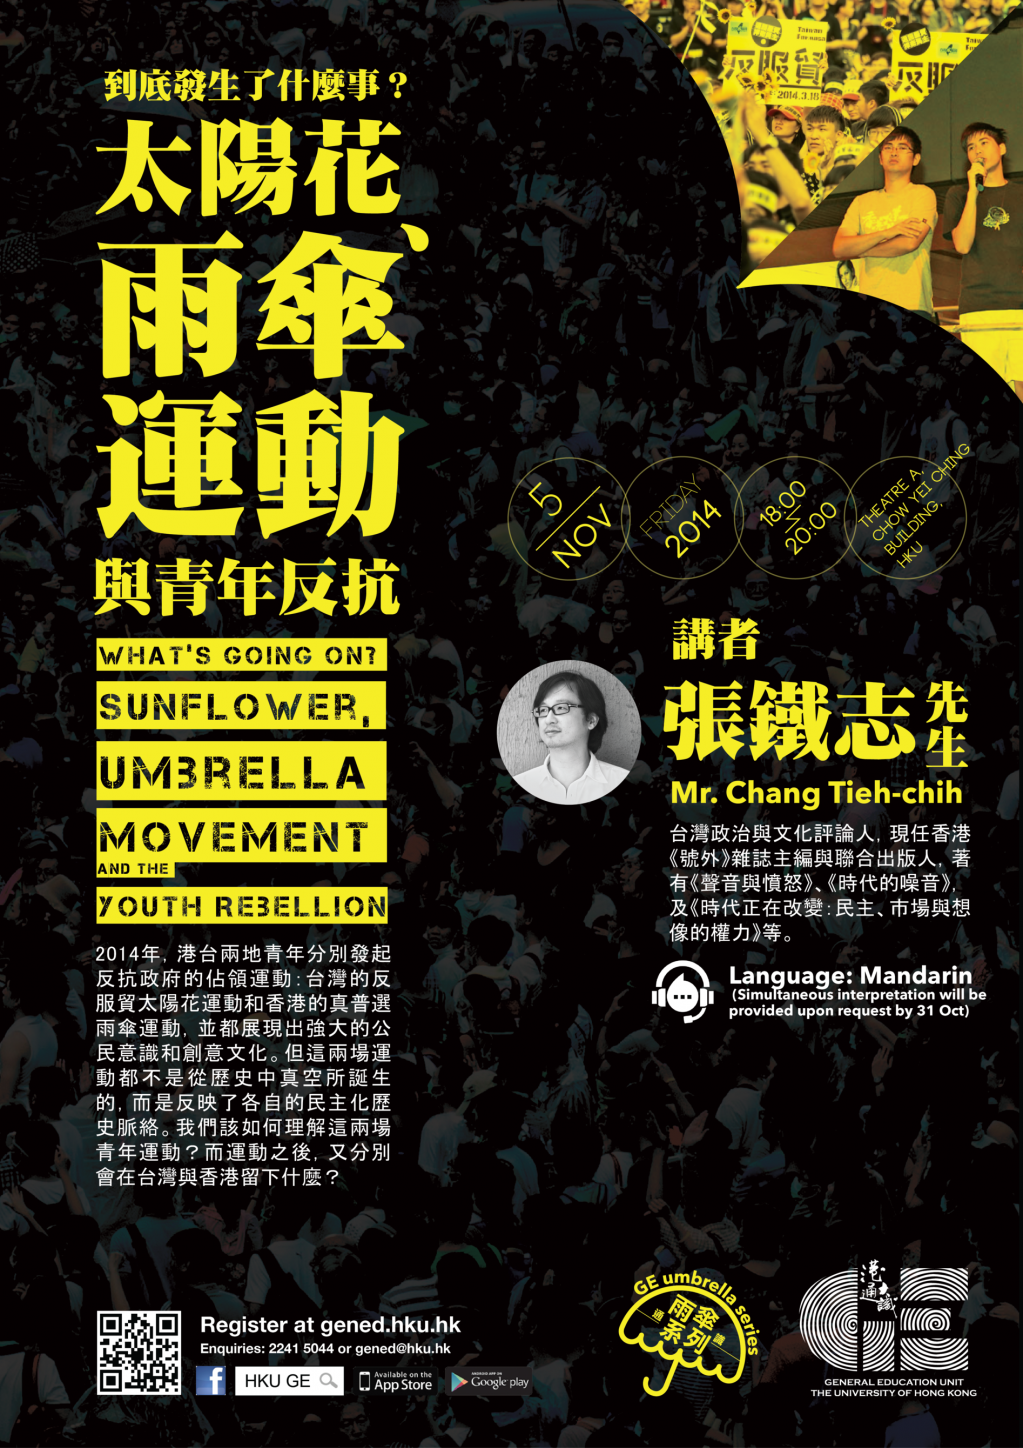 GE Presents: What's going on? Sunflower, Umbrella Movement and the Youth Rebellion  到底發生了什麼事？太陽花、雨傘運動與青年反抗